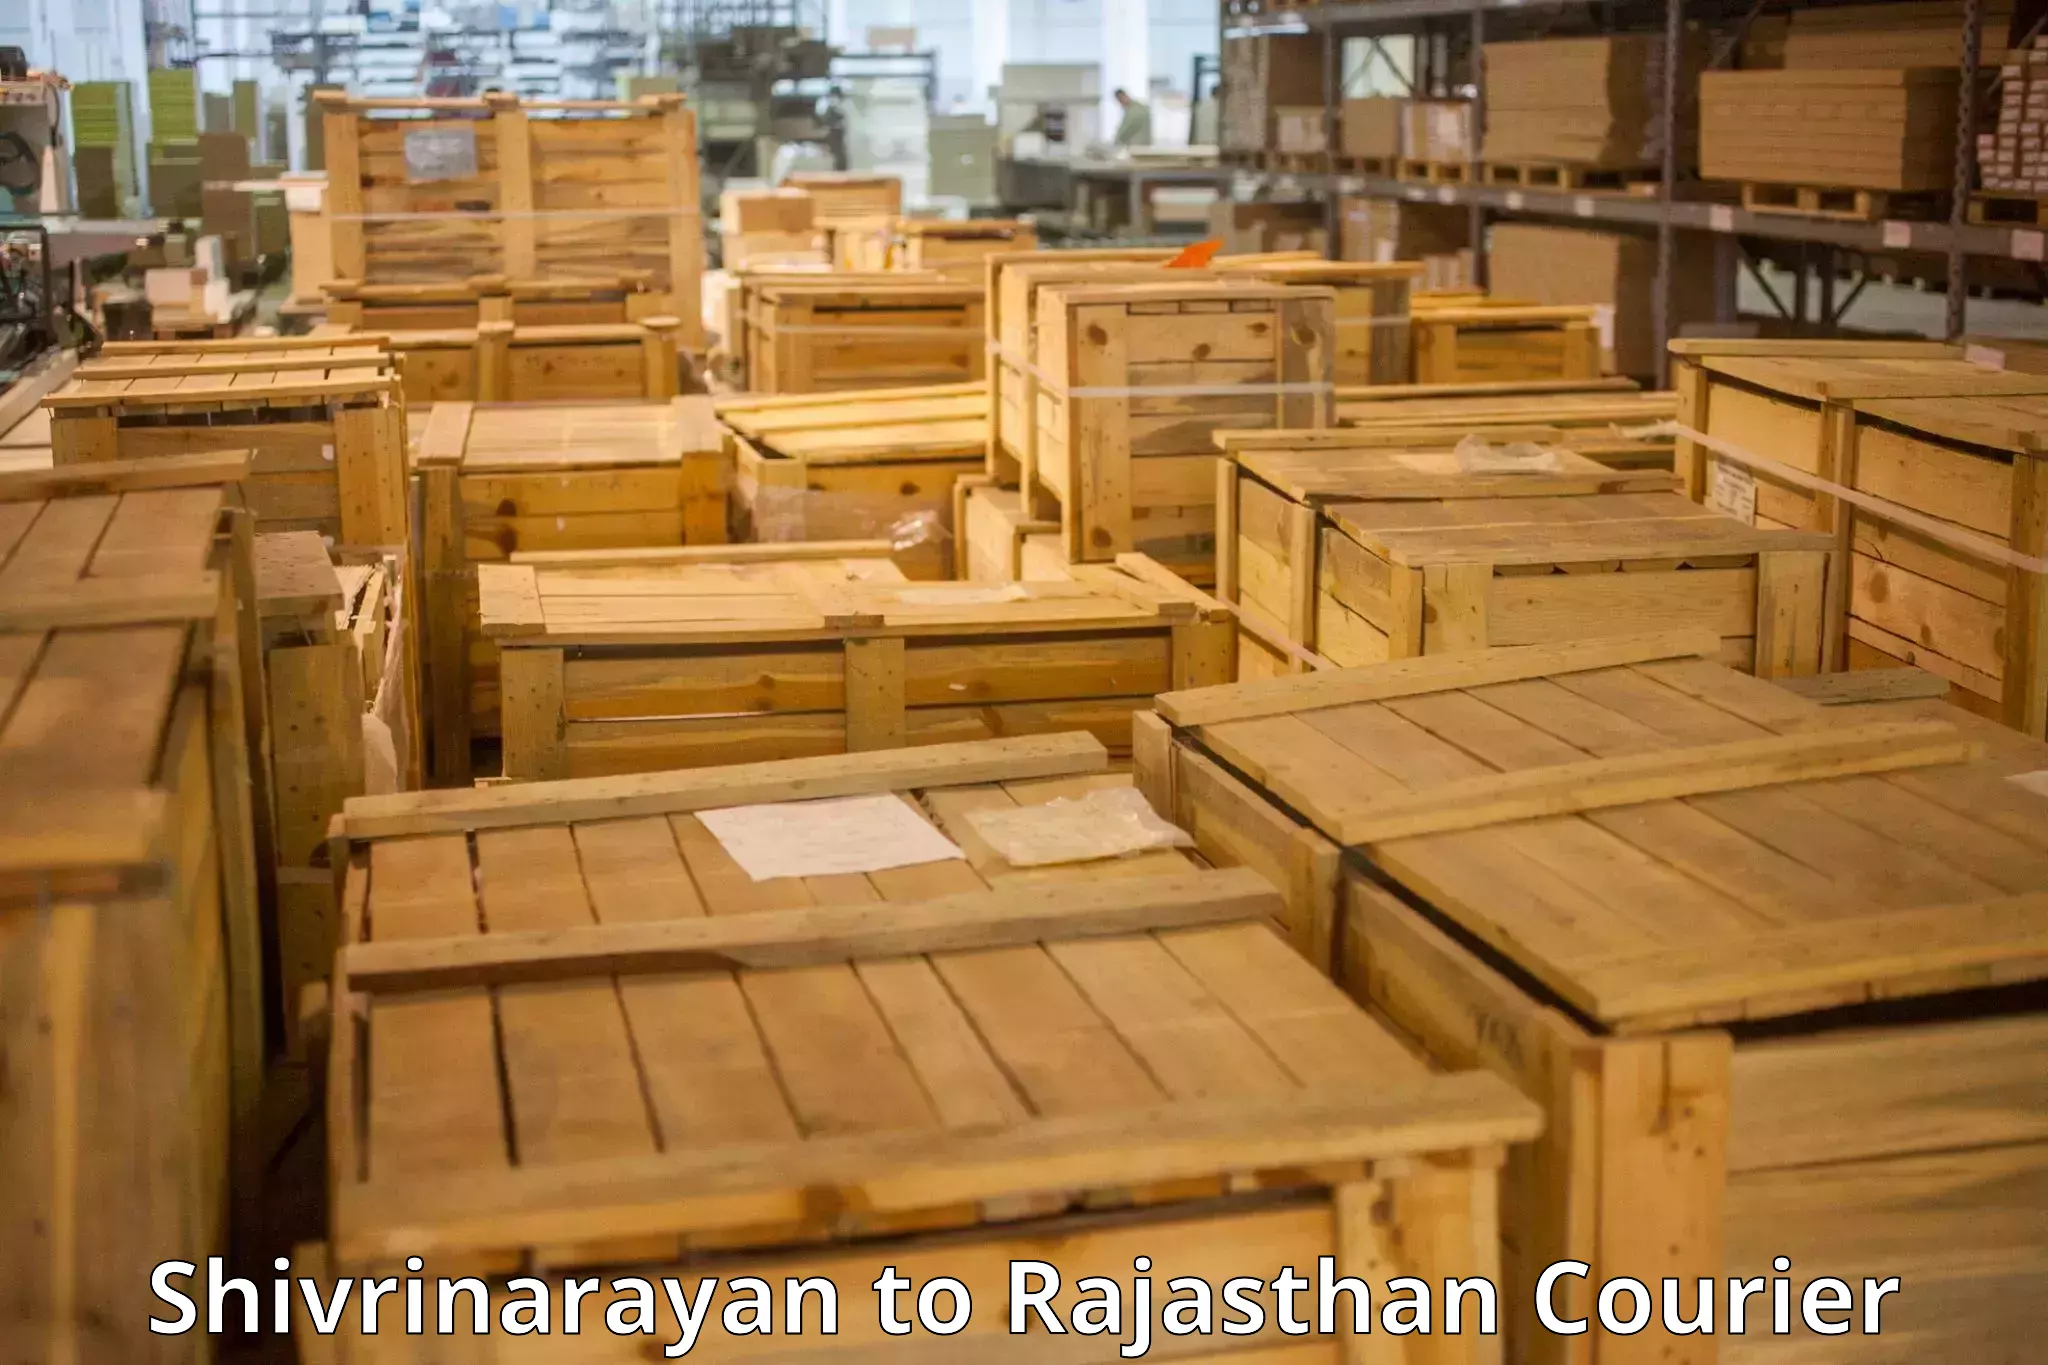 Luggage shipping specialists Shivrinarayan to Rajasthan